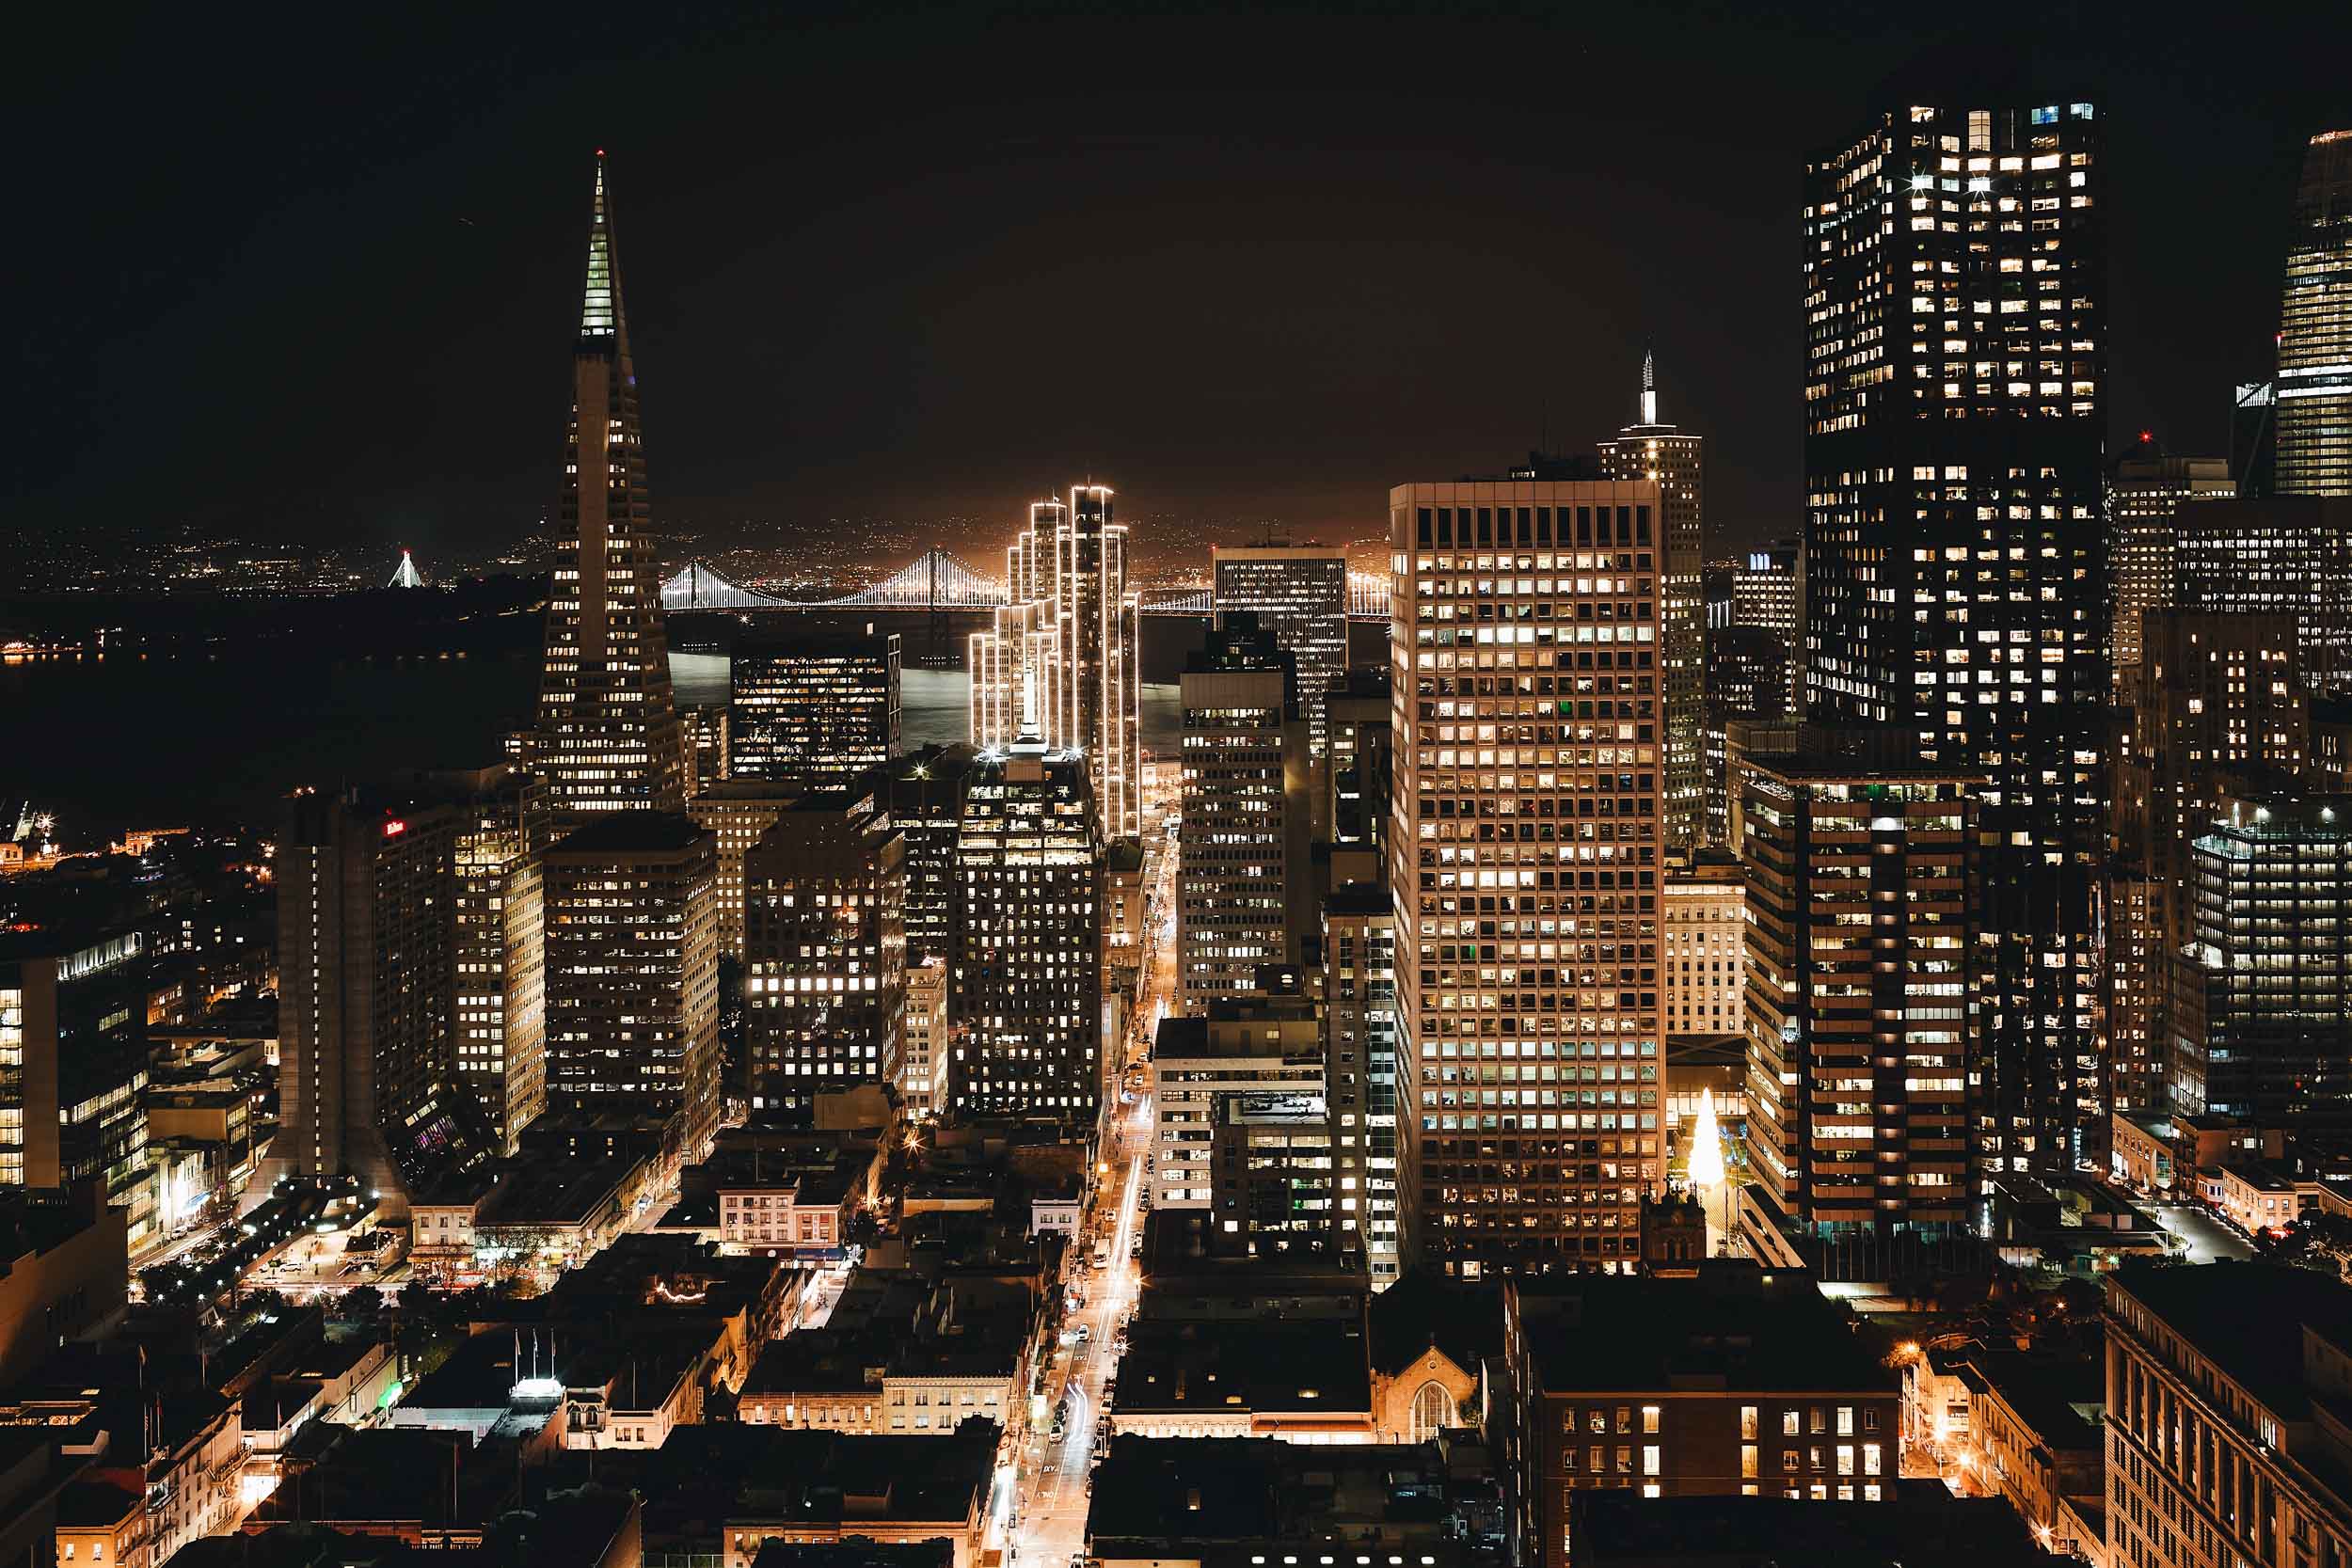 Nighttime views of downtown from the Fairmont San Francisco